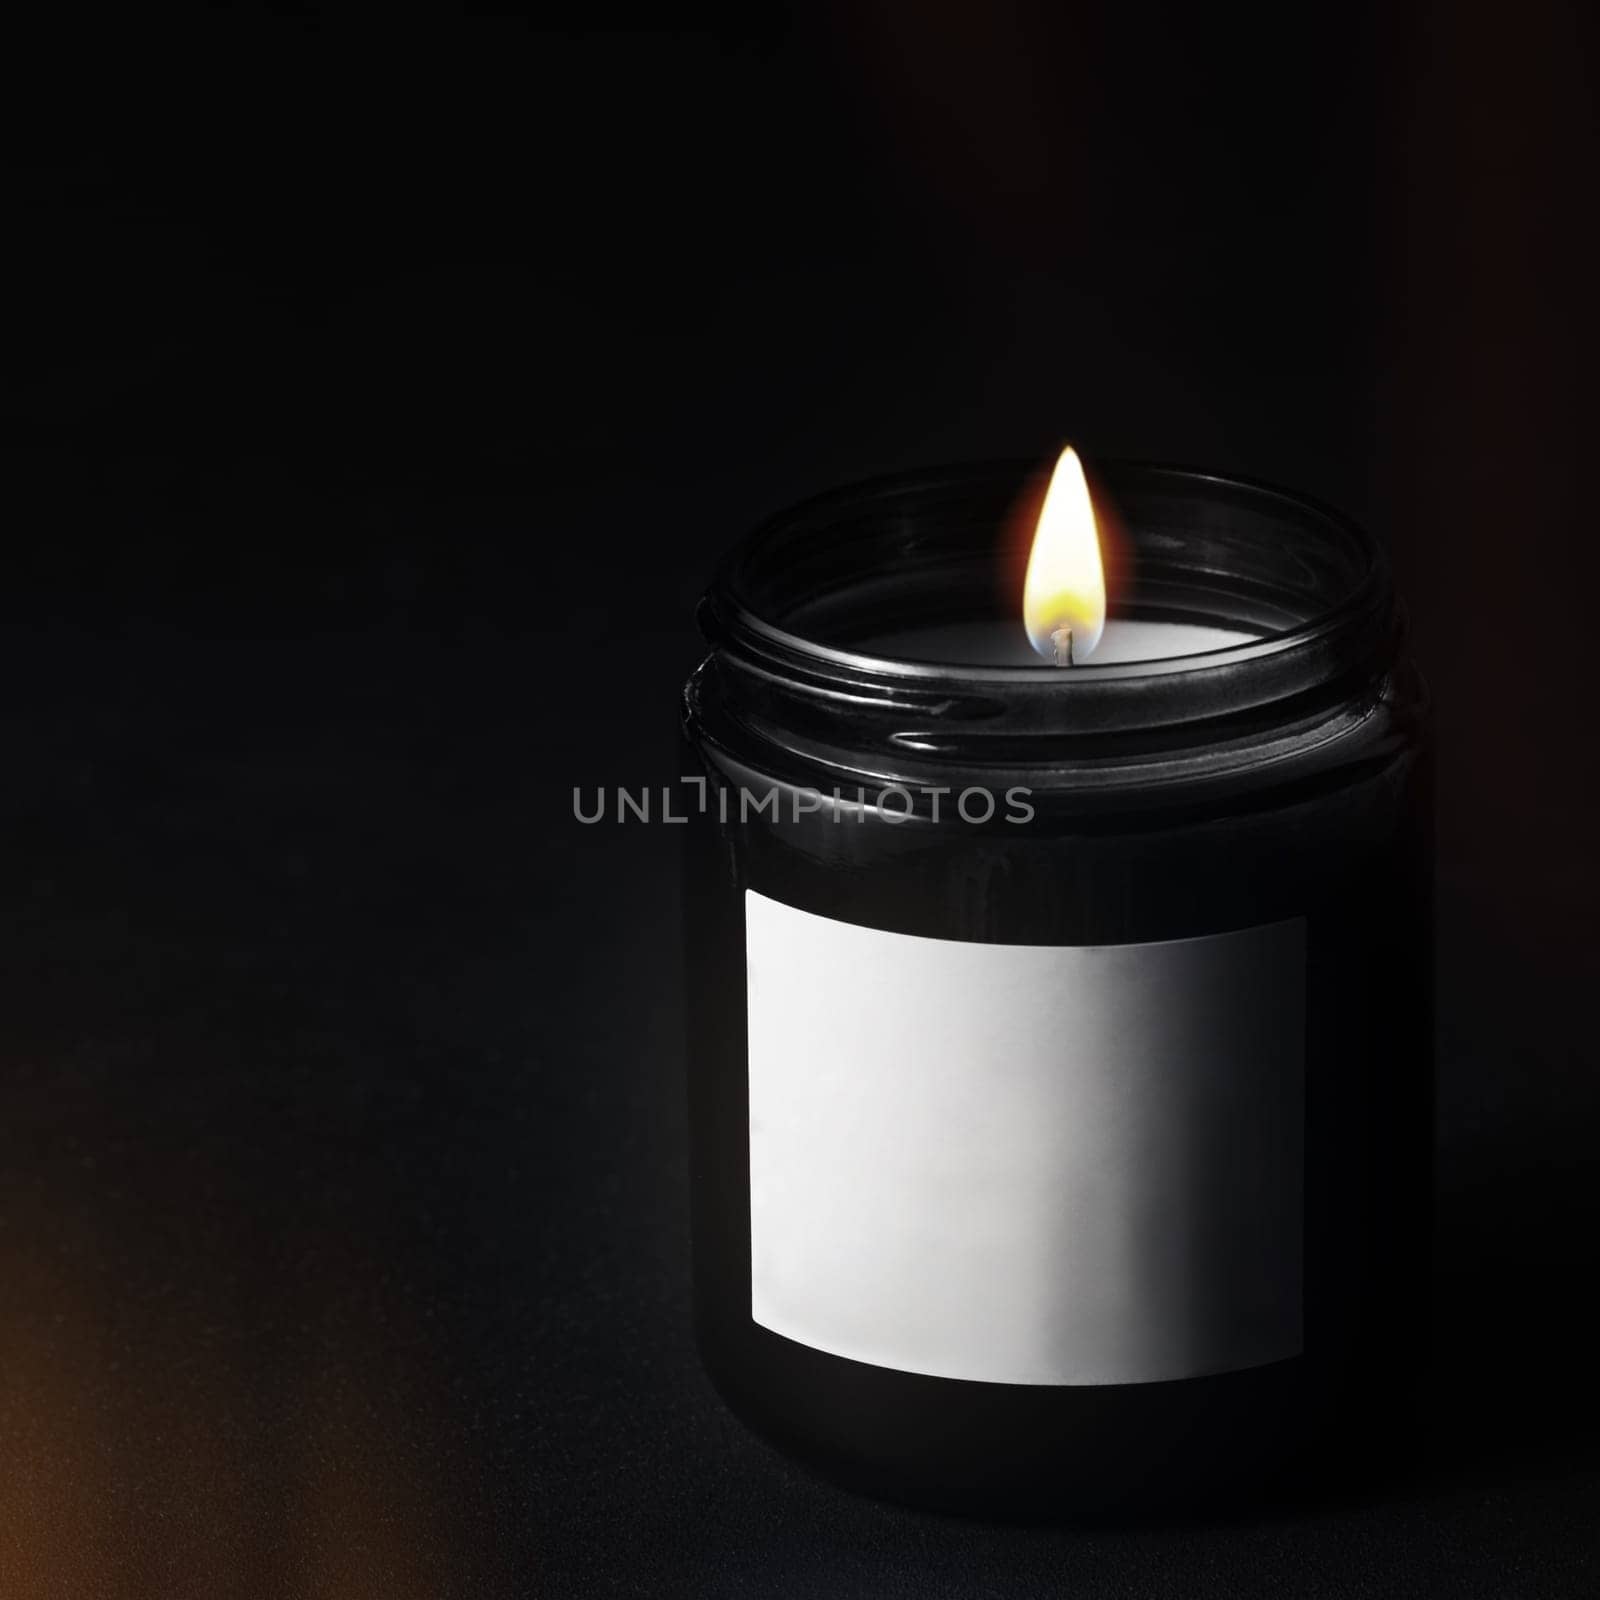 Decorative candle in a black glass jar by clusterx